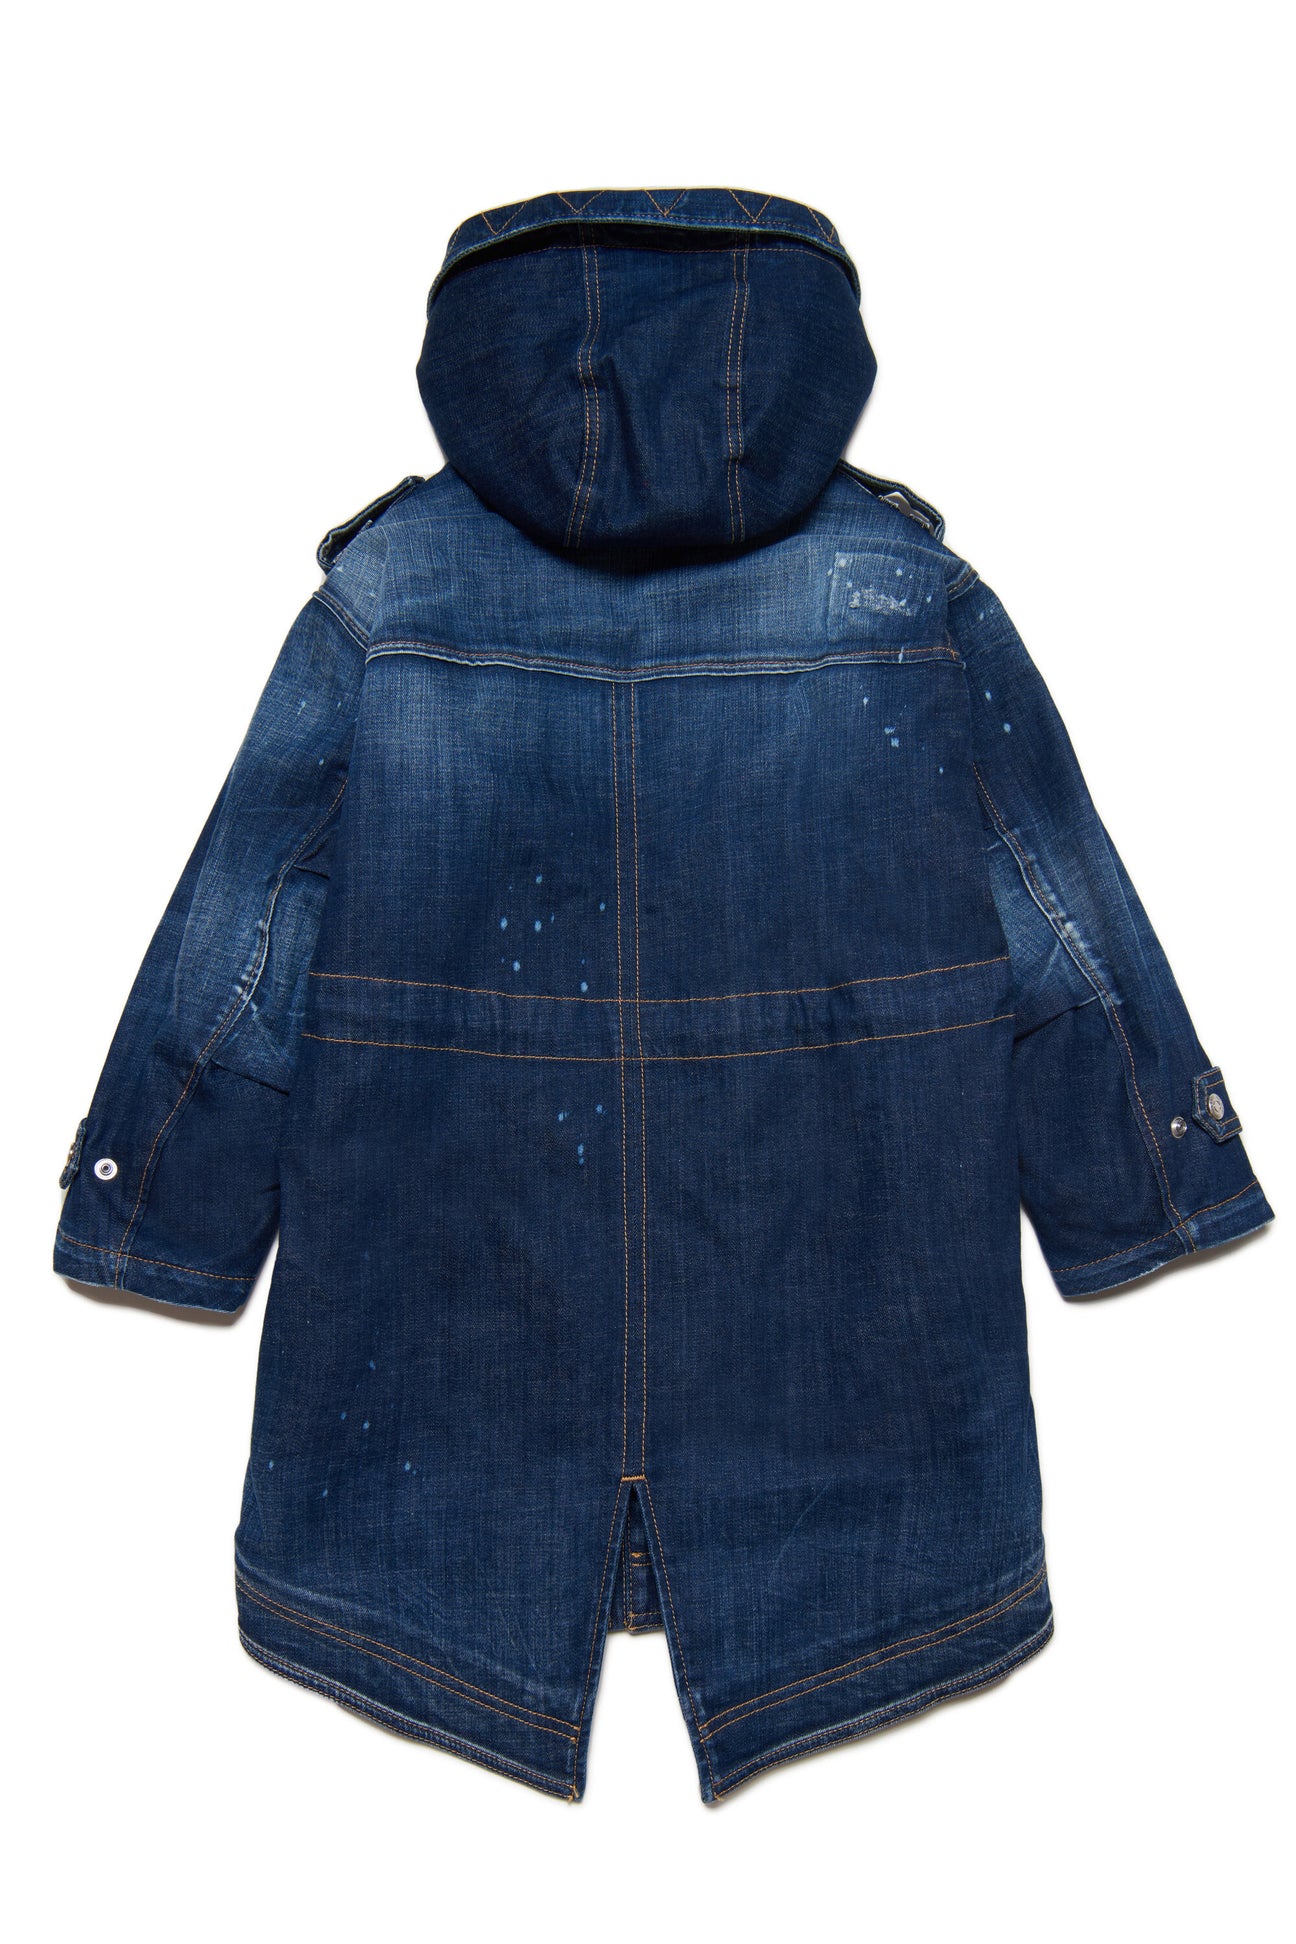 Shaded blue denim parka jacket with abrasions and stains Shaded blue denim parka jacket with abrasions and stains